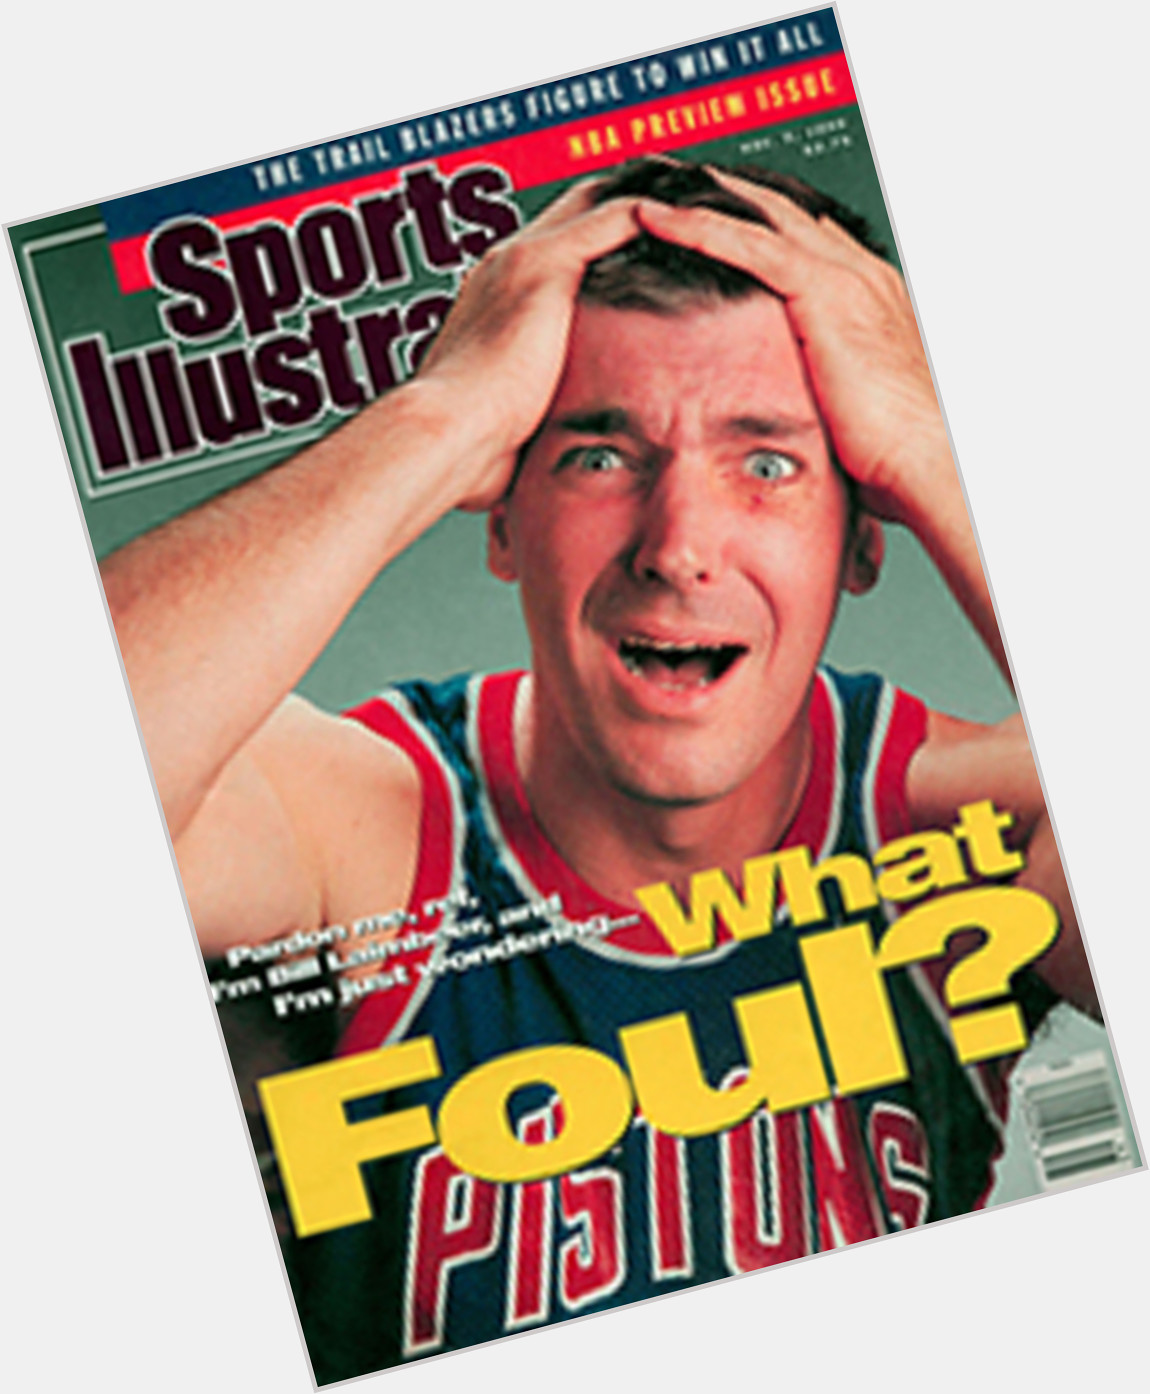 Happy Birthday Bill Laimbeer!

Give us an old SI Cover you like! 